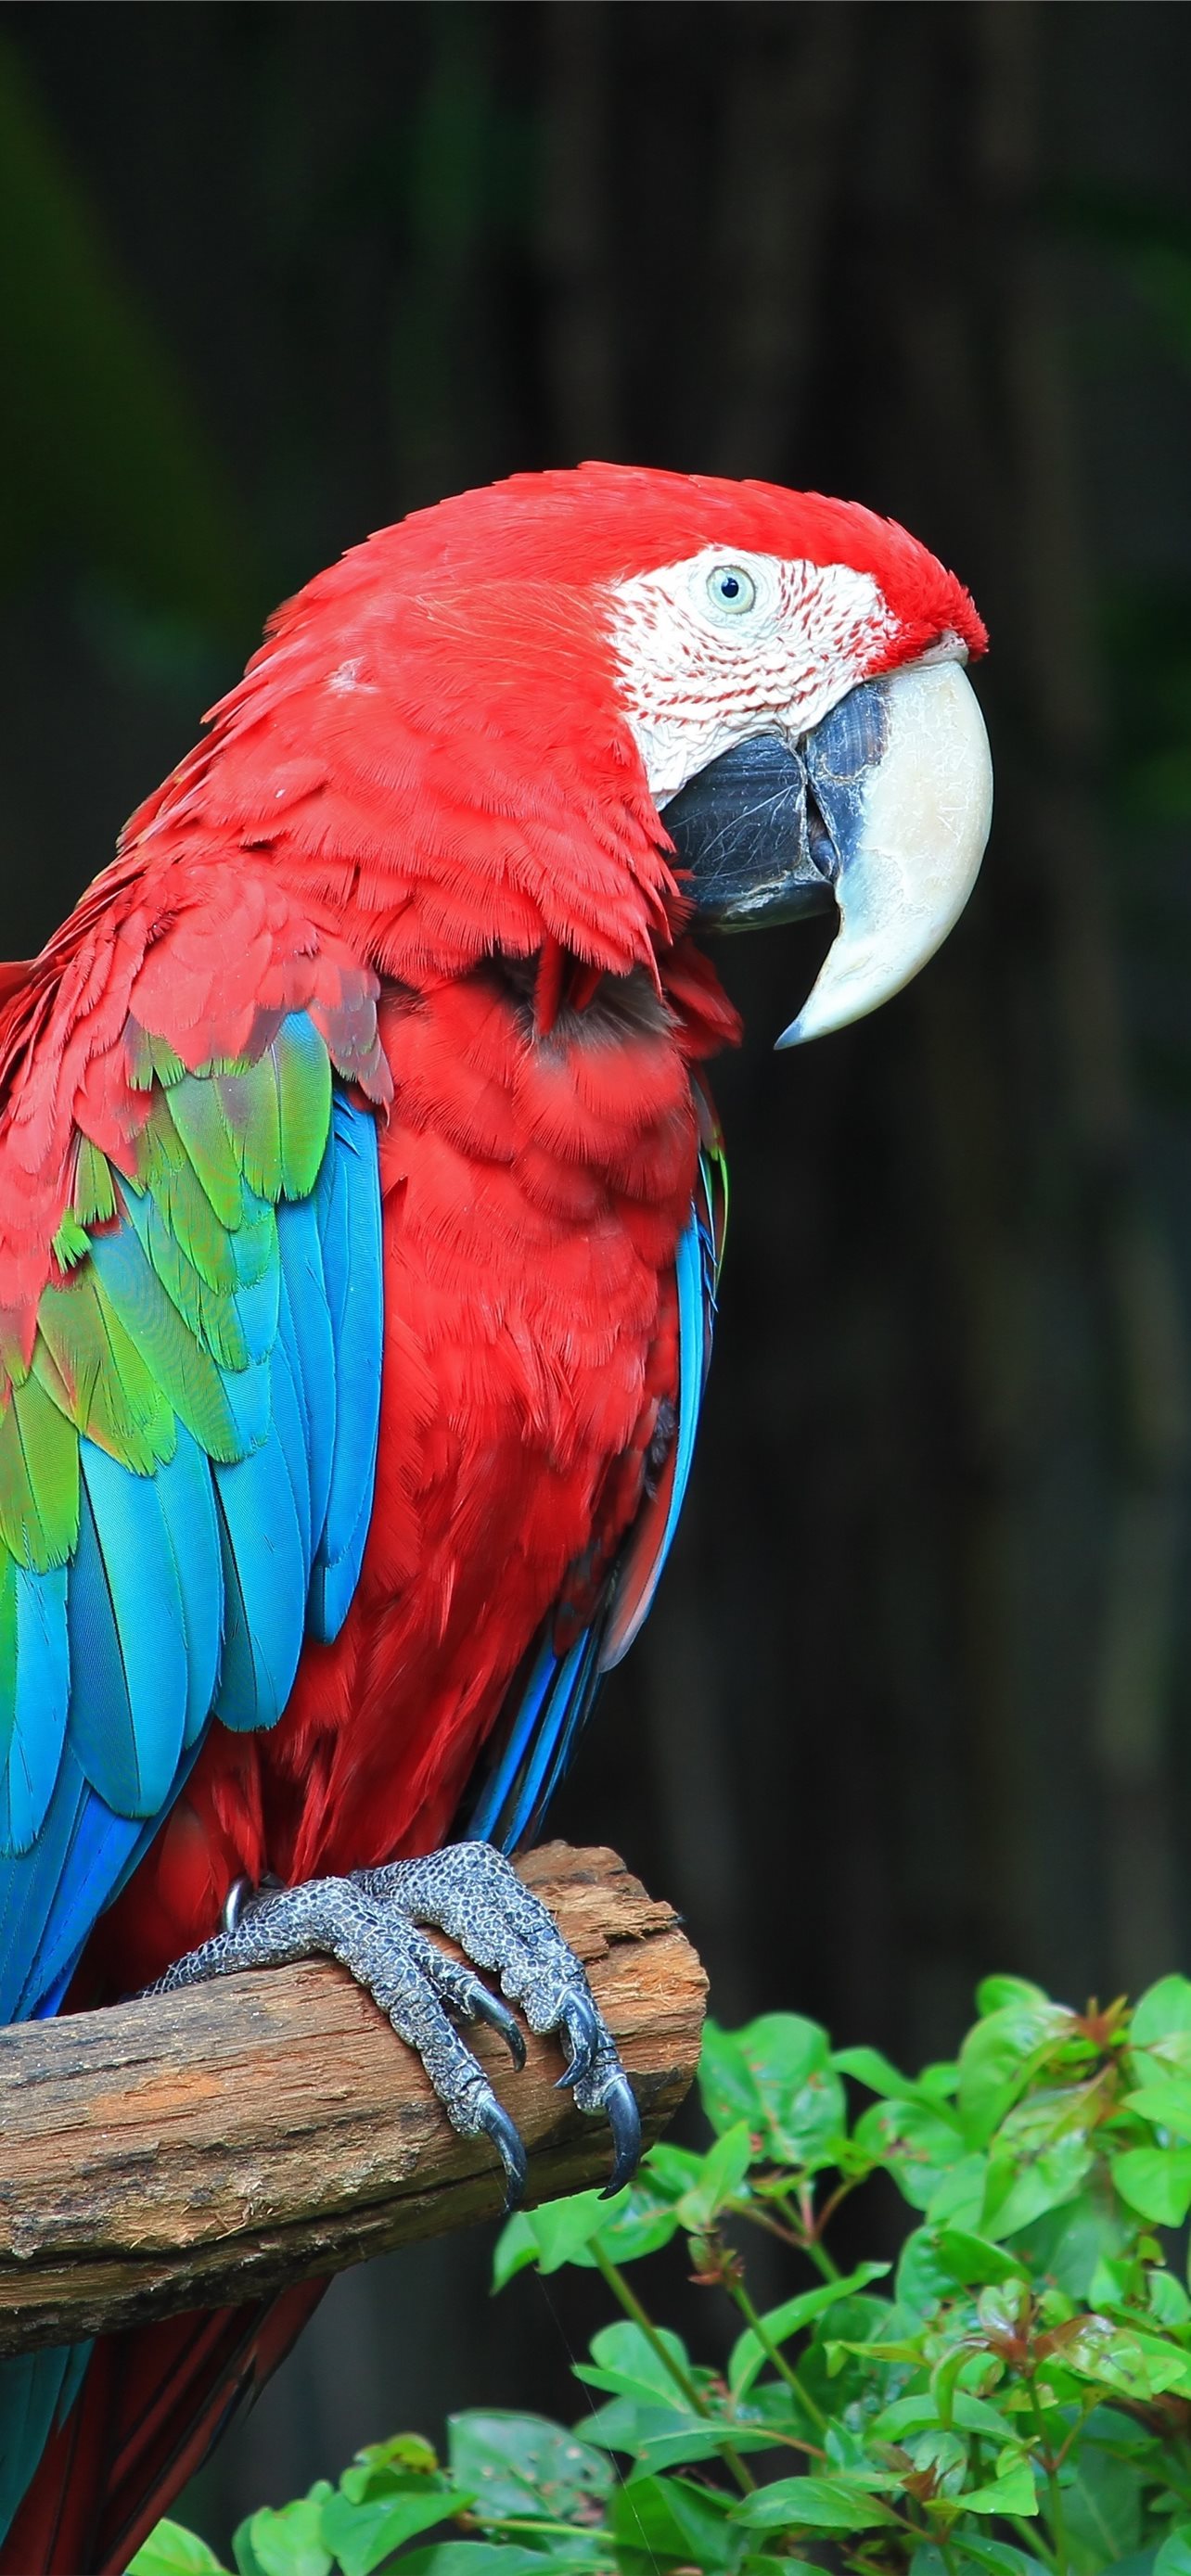 Colorful Parrot Bird on Tree Branch iPhone Wallpaper Free Download